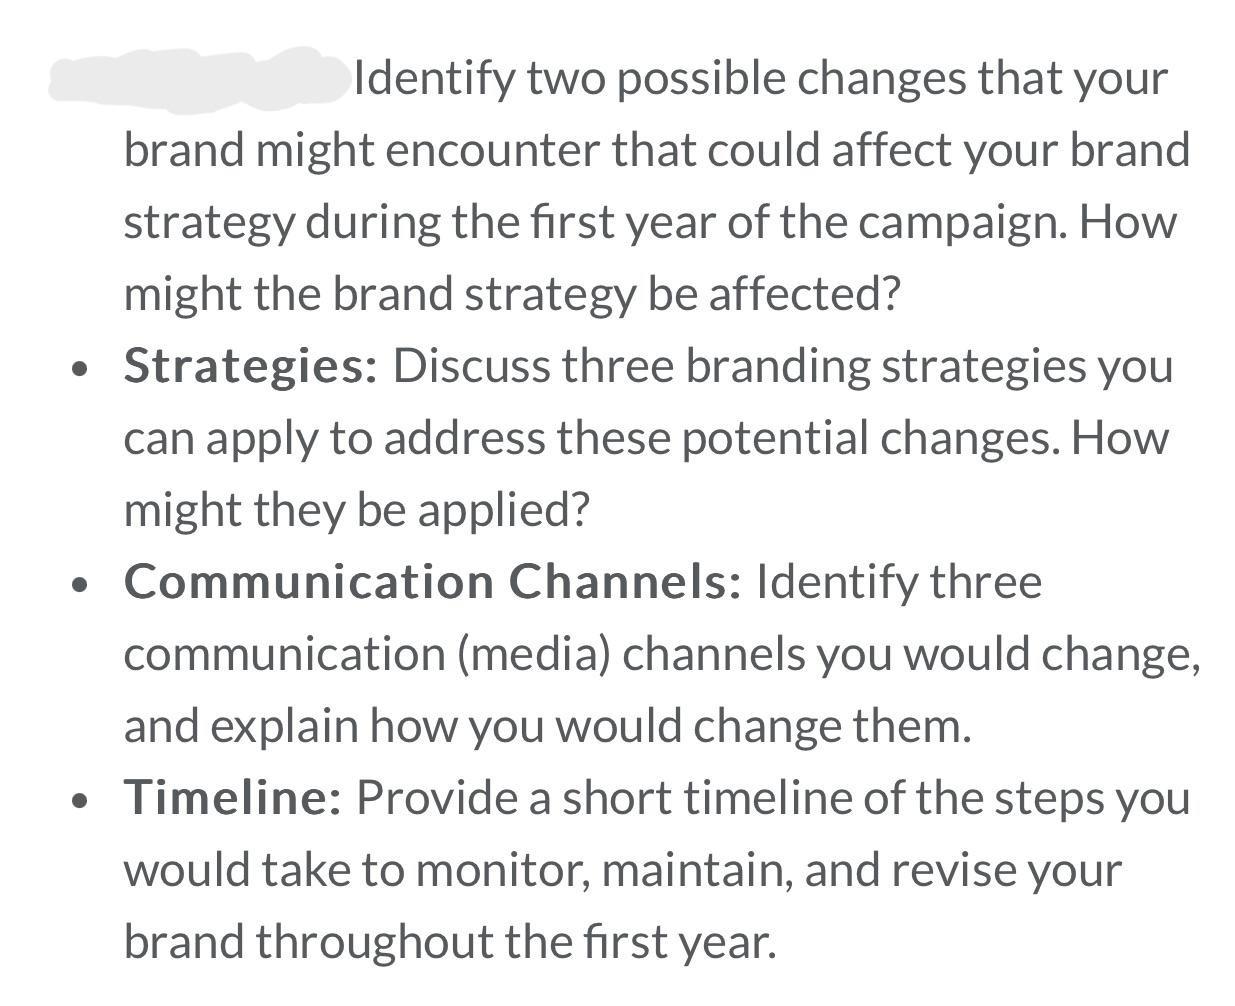 Strategies: Discuss three branding strategies you can apply to address these potential changes. How might